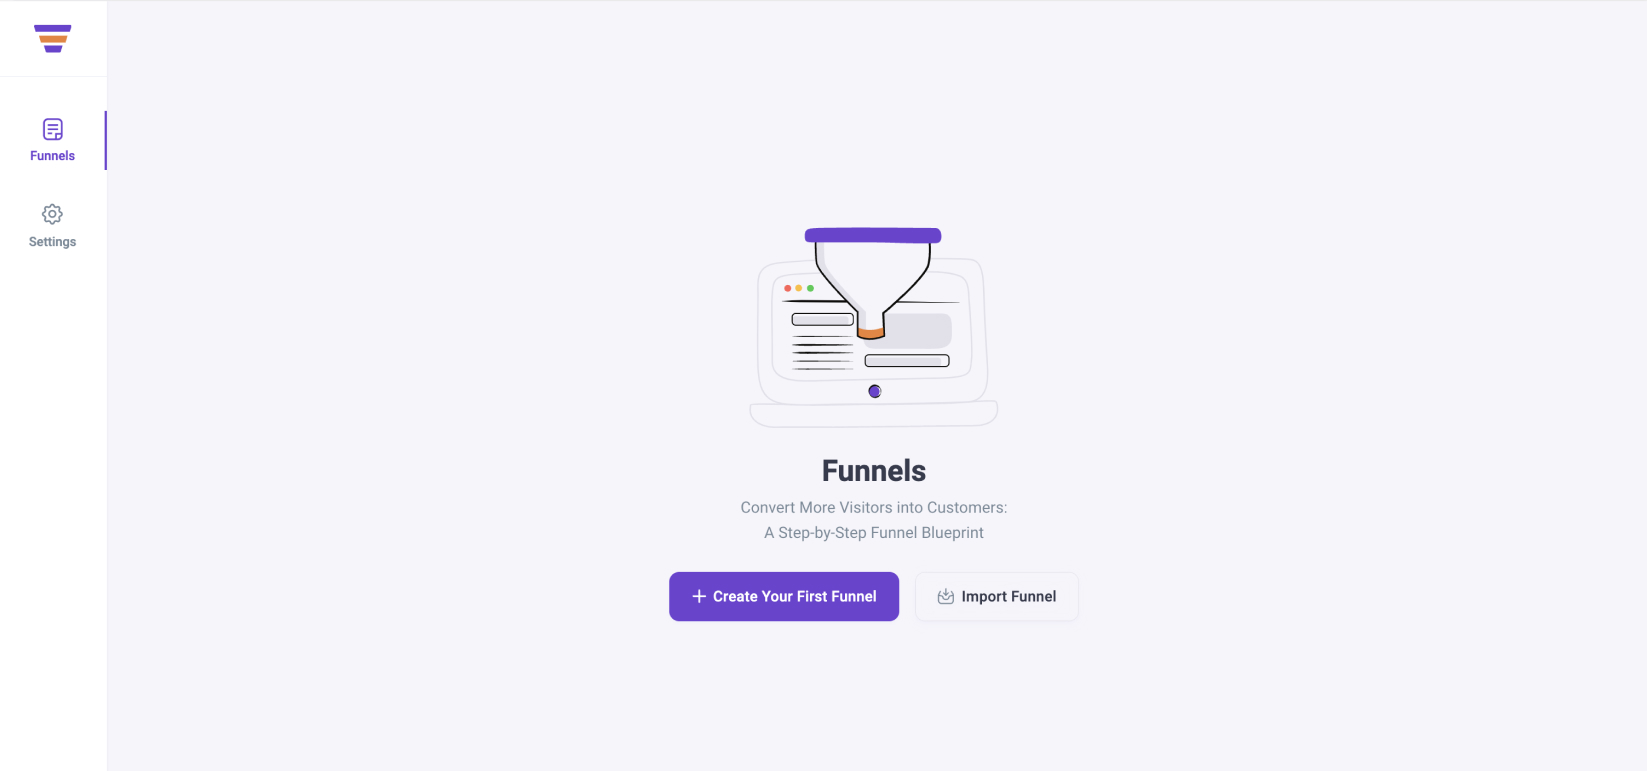 Create Your First Funnel